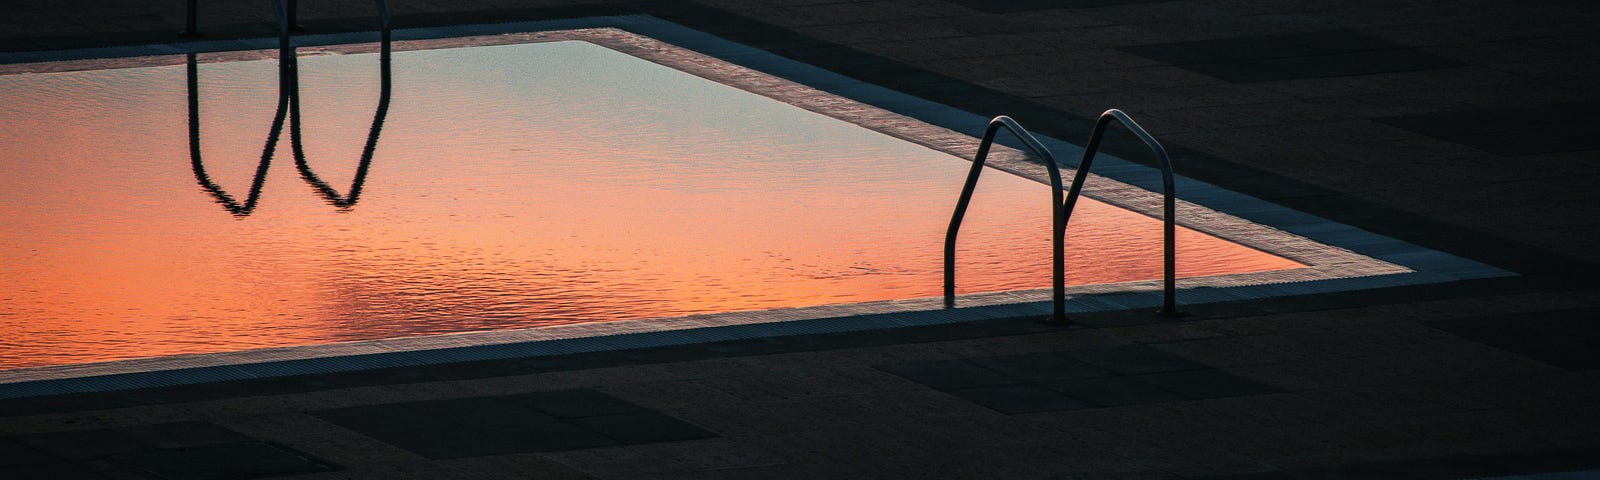 A sunset reflecting off the surface of a pool. The reflection of the ladder adding a plot twist. One ladder allows you to climb out of the water, the other seems to guide you in, deep below the surface.